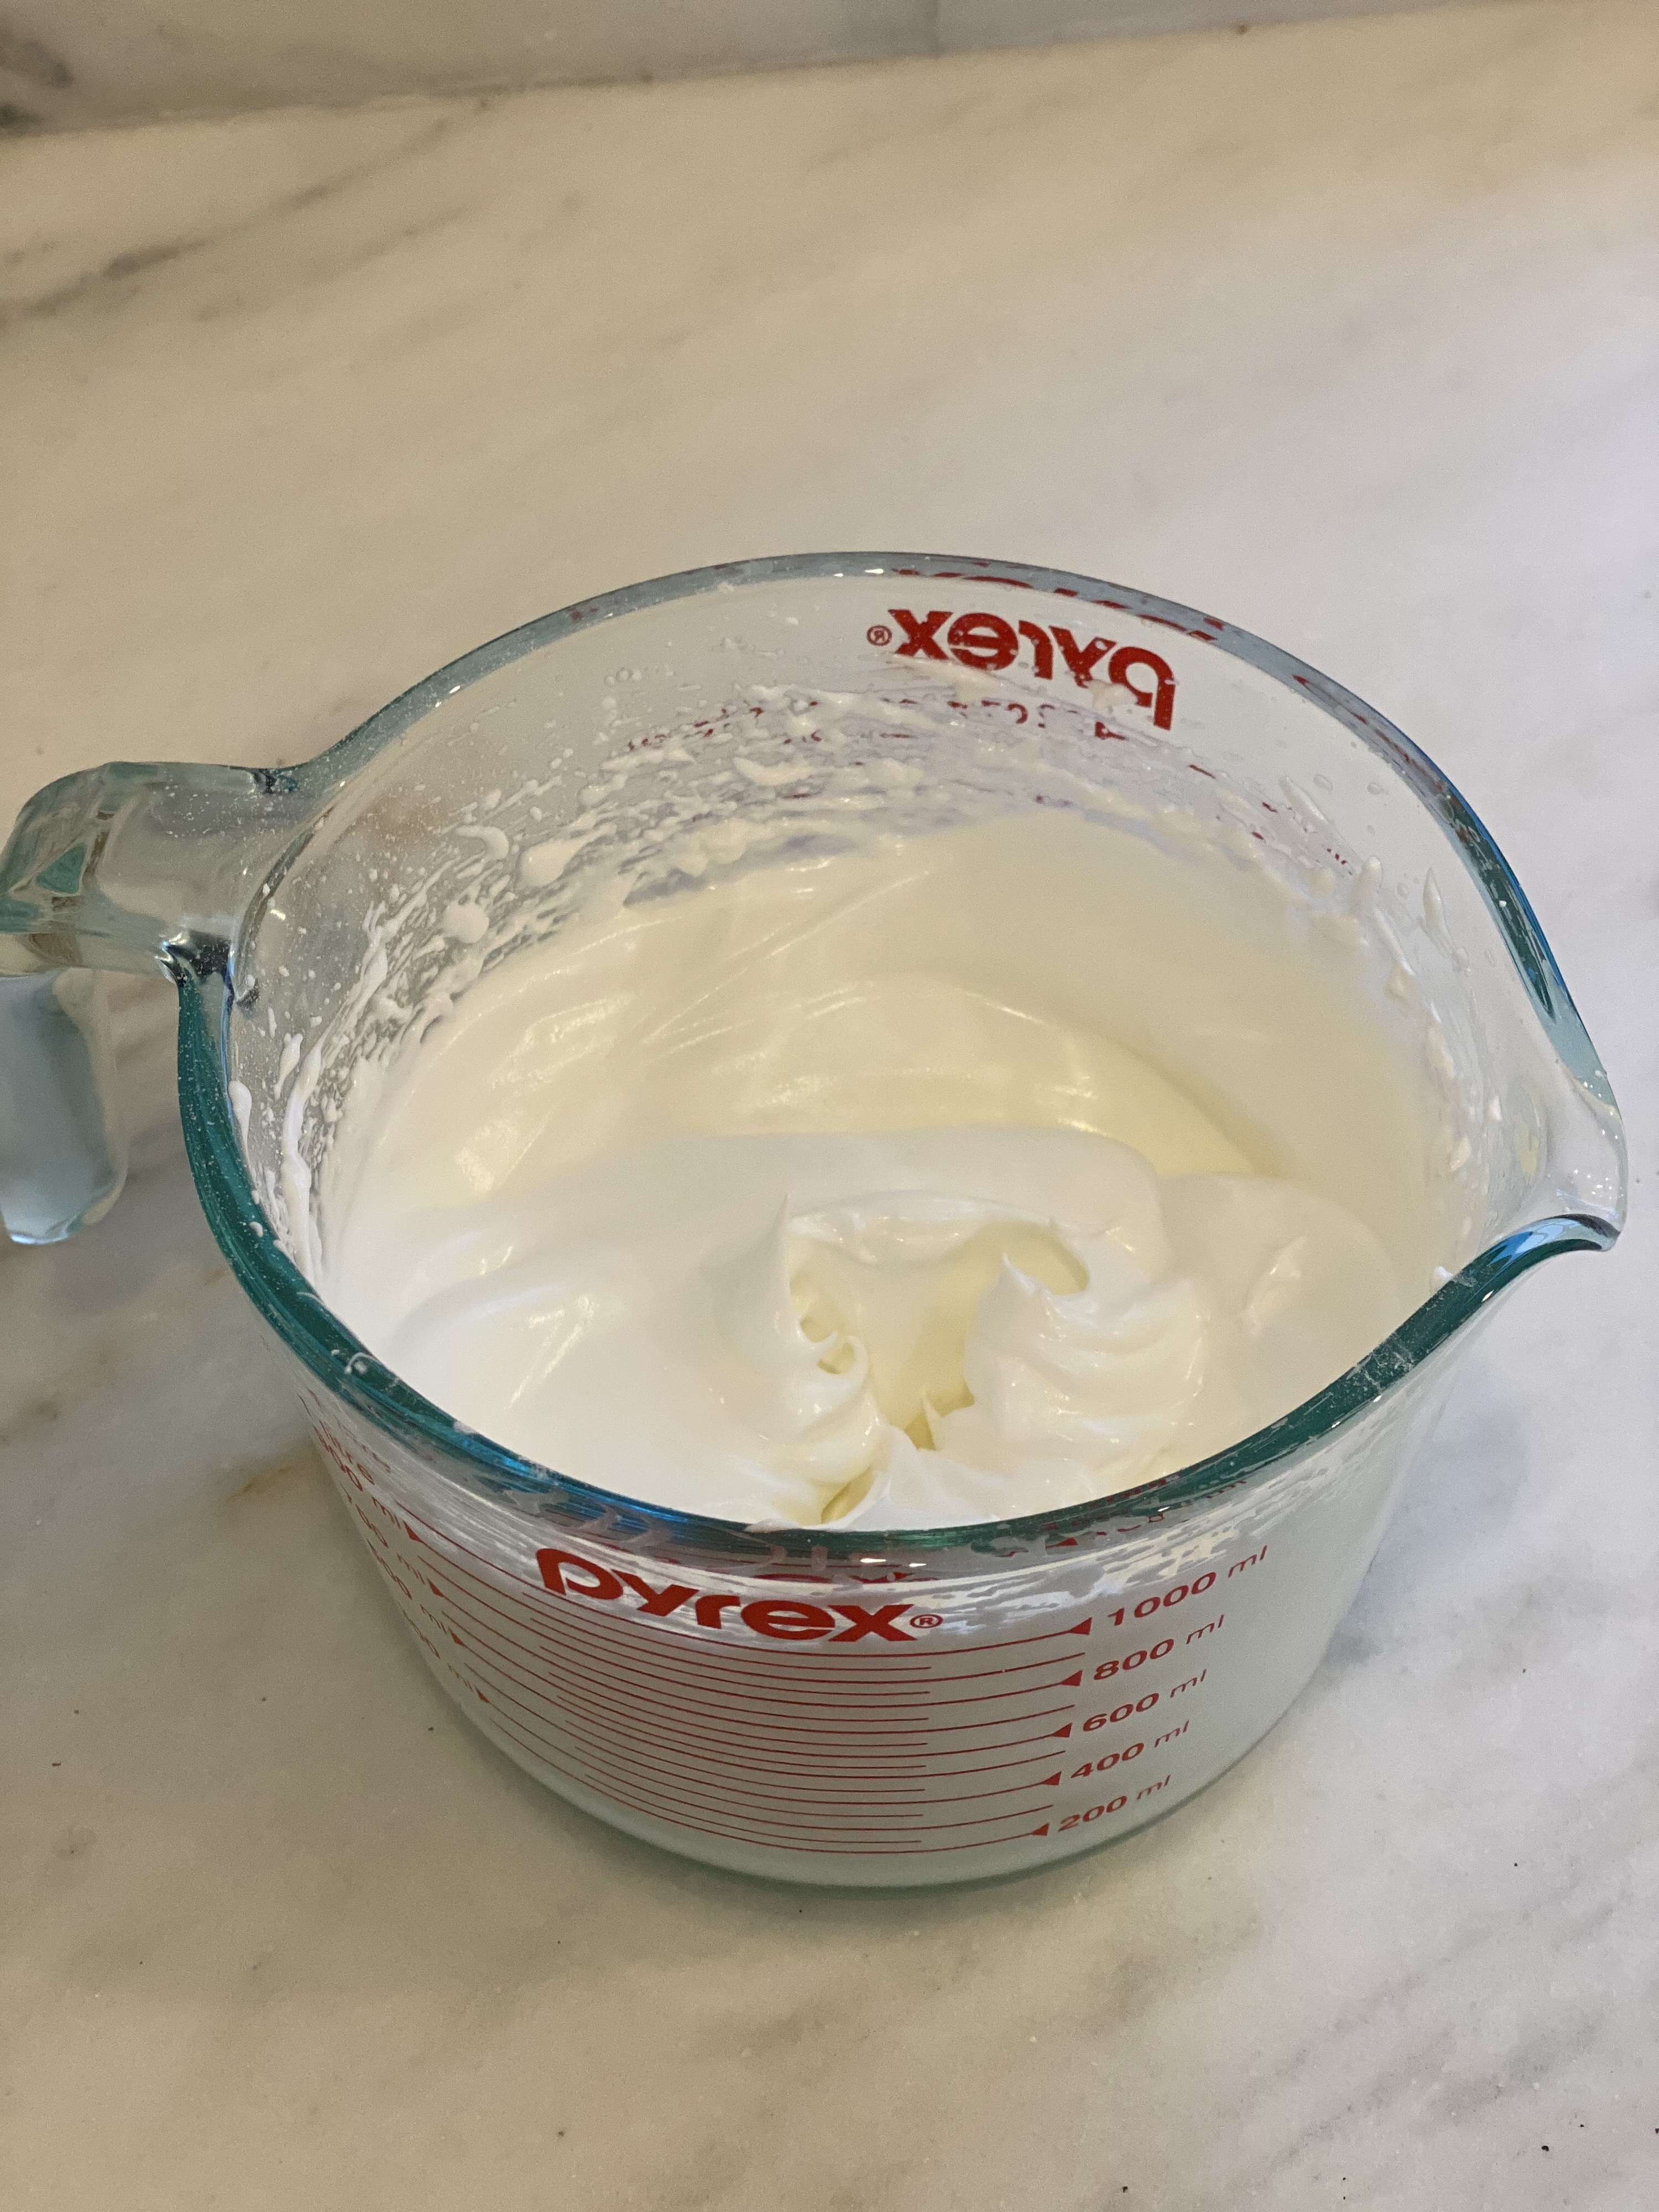 The egg white mixture with stiff peaks in a measuring cup.